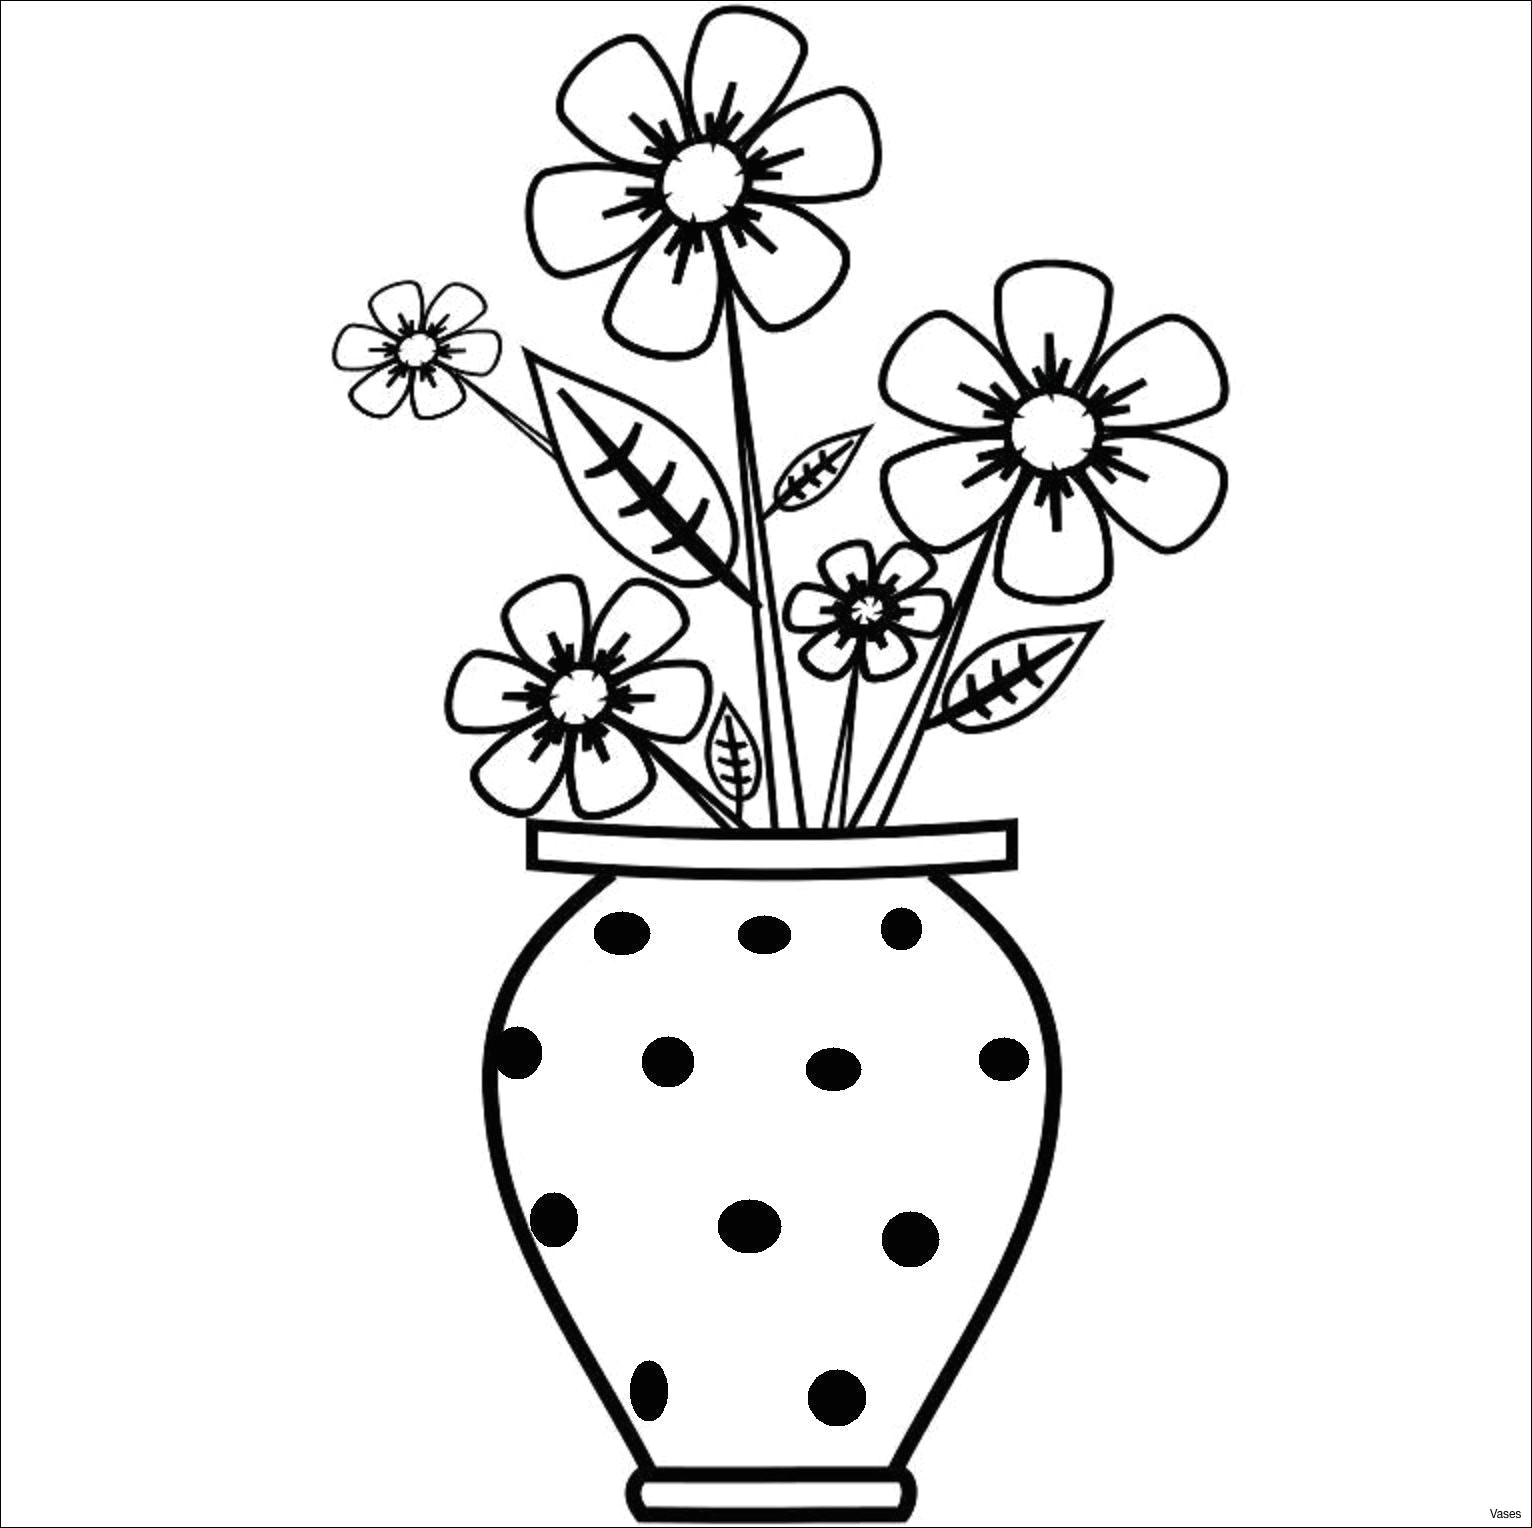 easy black and white drawings vase art drawings how to draw a vase step 2h vases